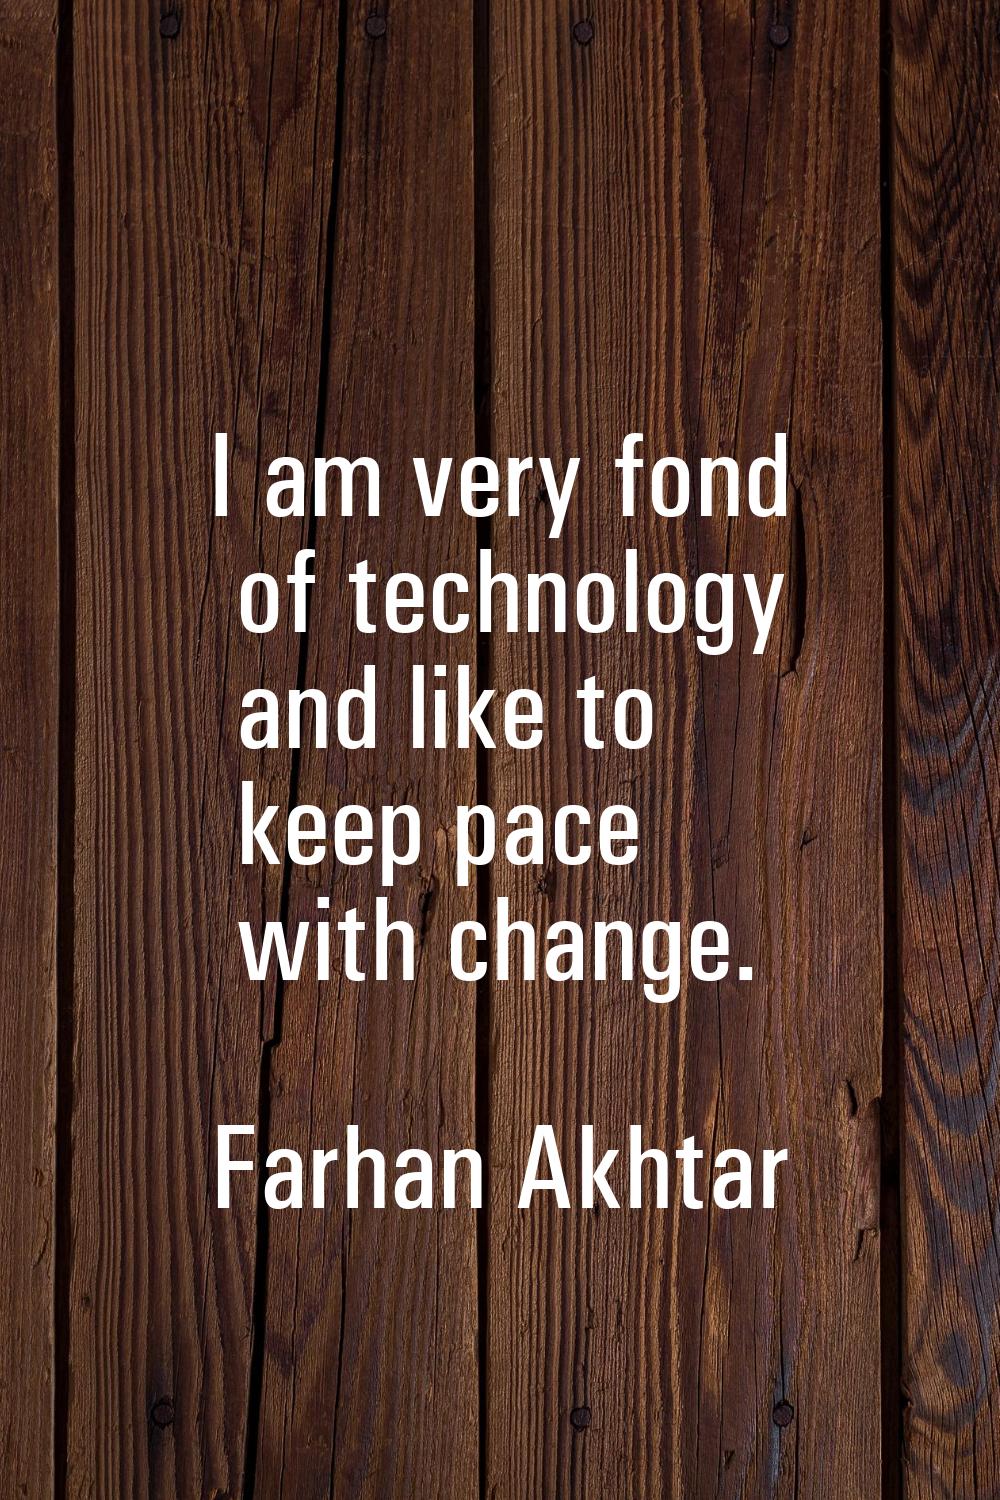 I am very fond of technology and like to keep pace with change.